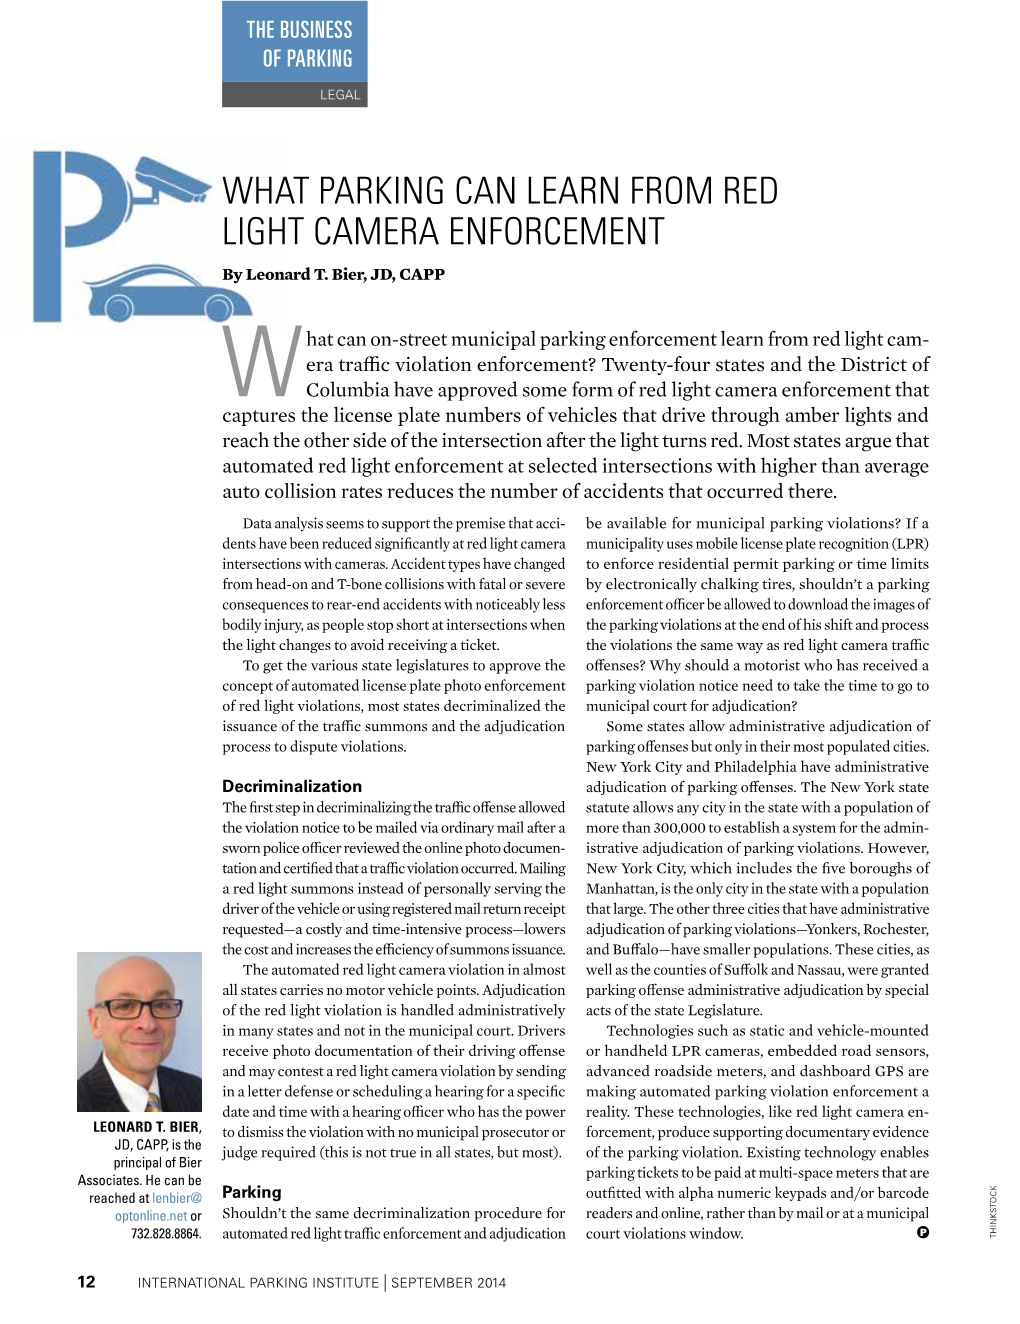 WHAT PARKING CAN LEARN from RED LIGHT CAMERA ENFORCEMENT by Leonard T